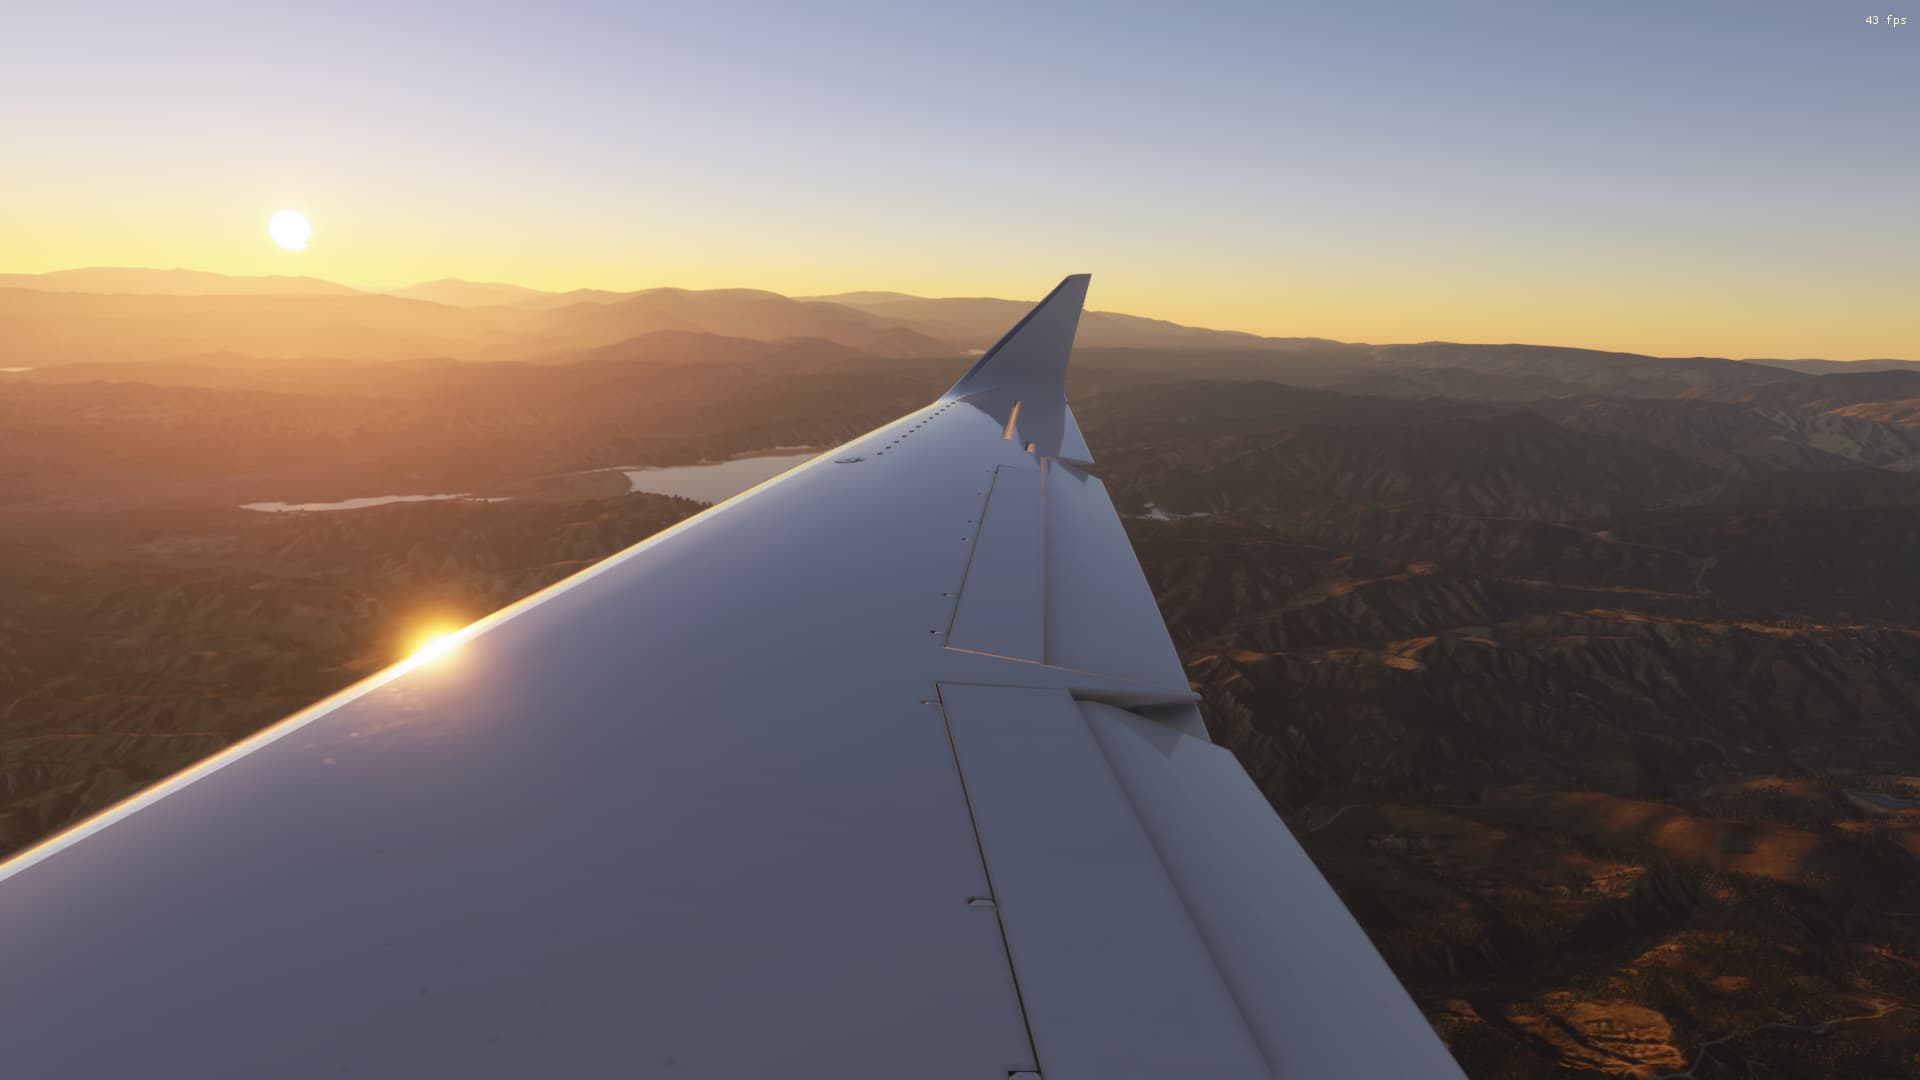 Looking out the window of an aircraft at its wing. In the horizon the sun is setting.